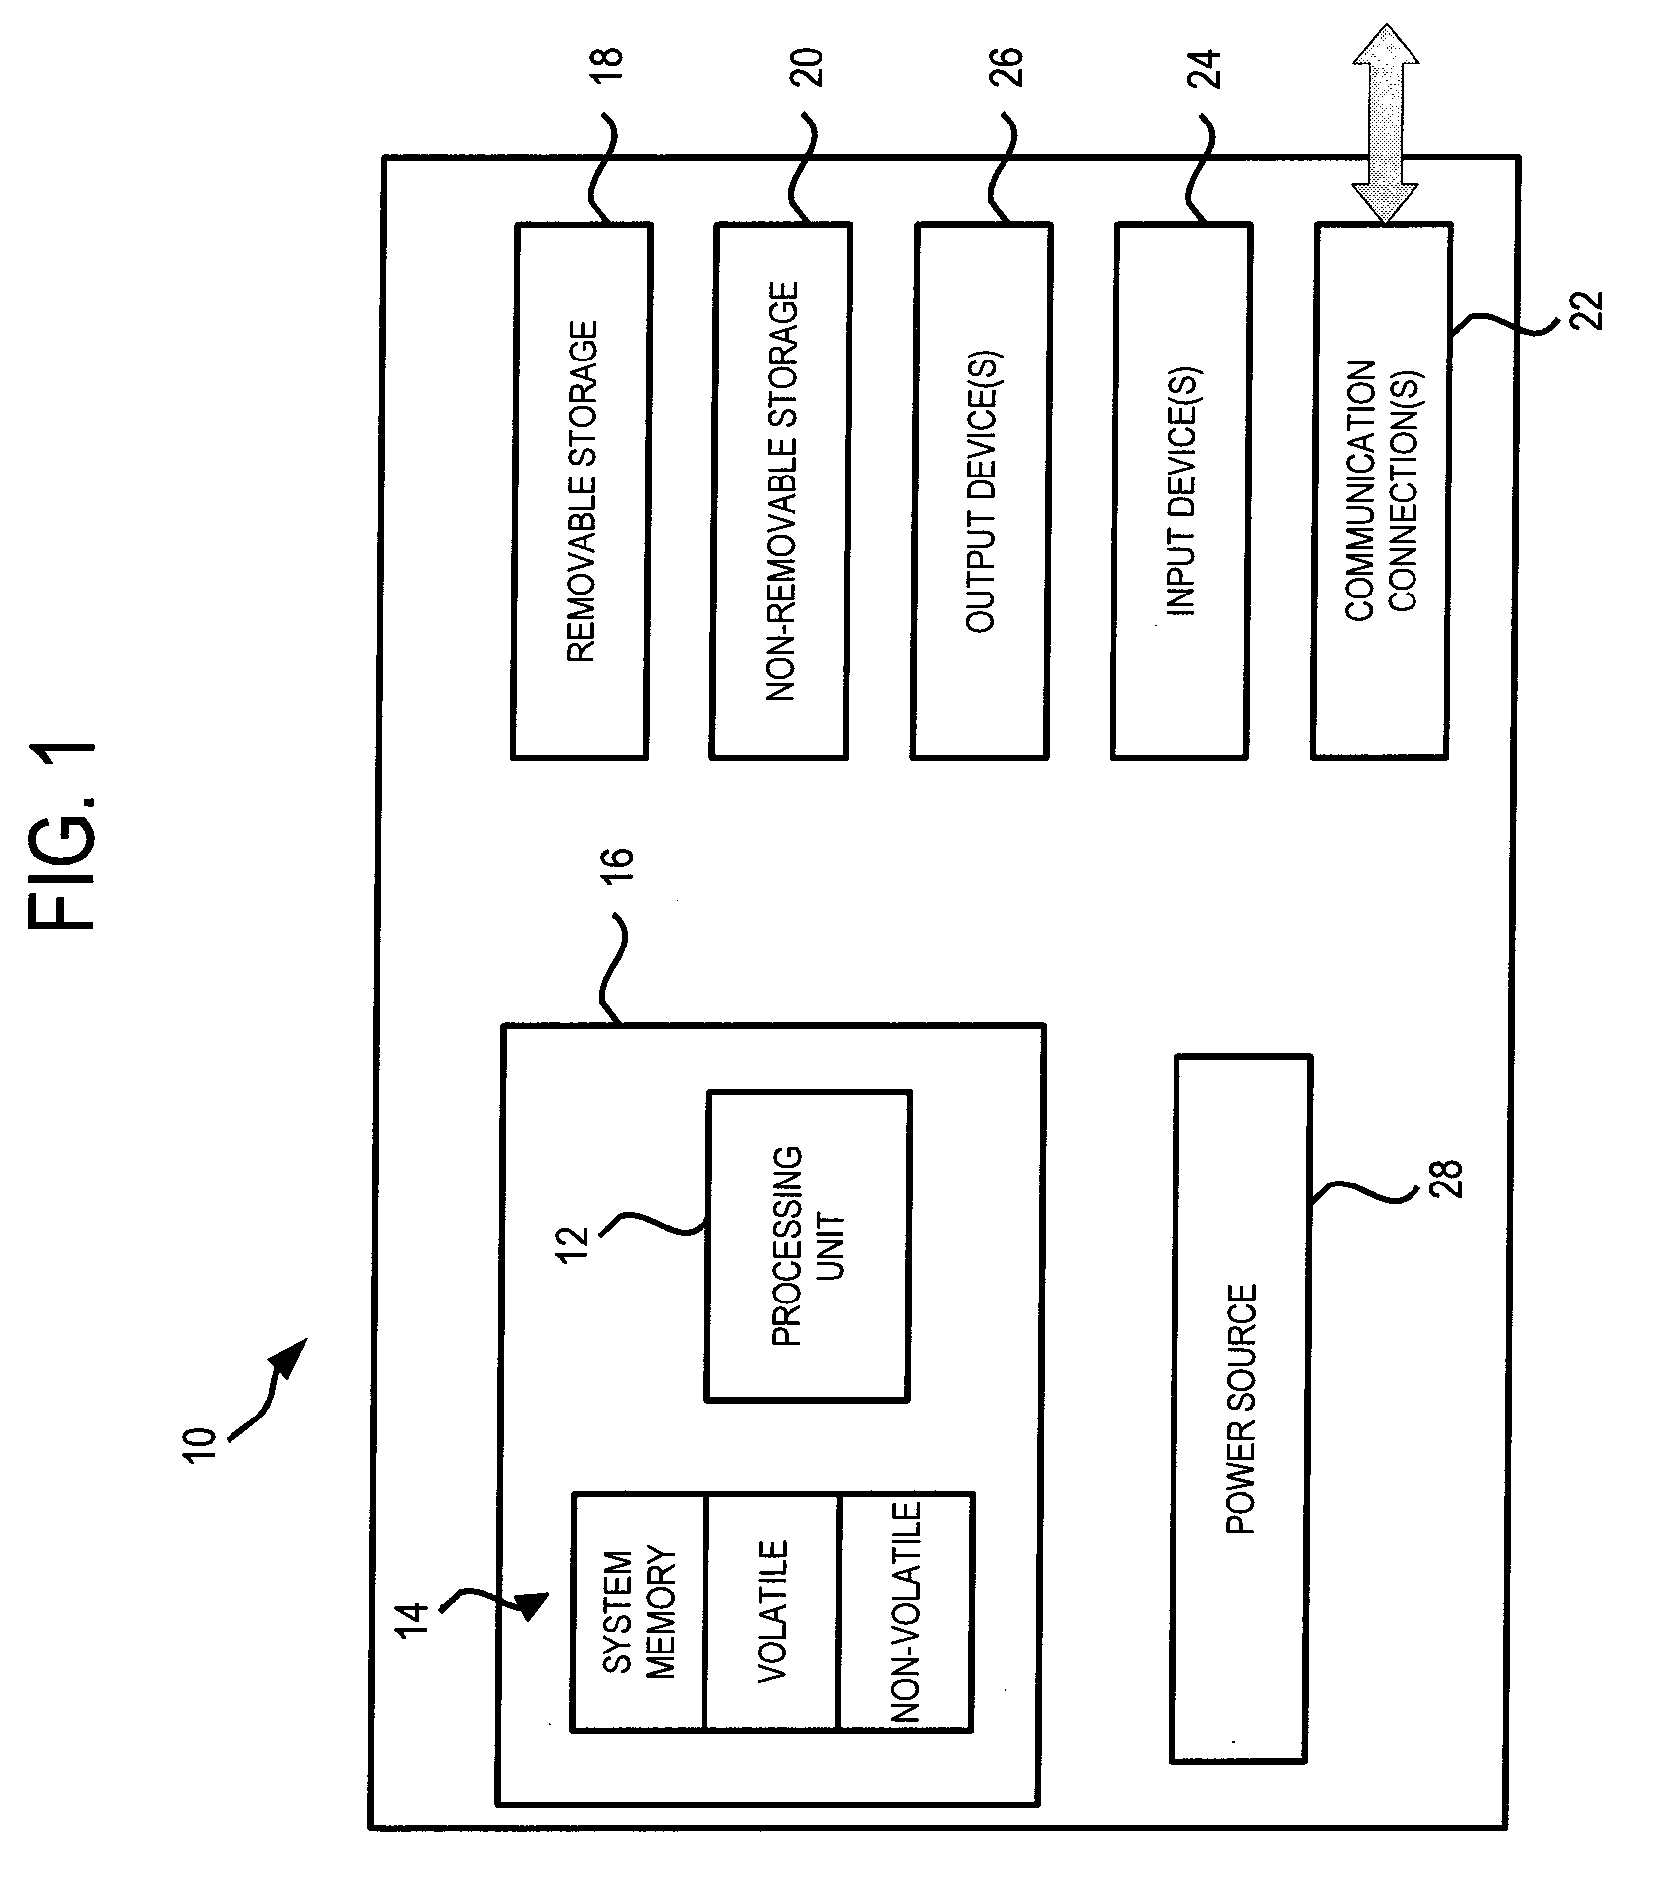 System and method for adjusting media access control parameters in a wireless network